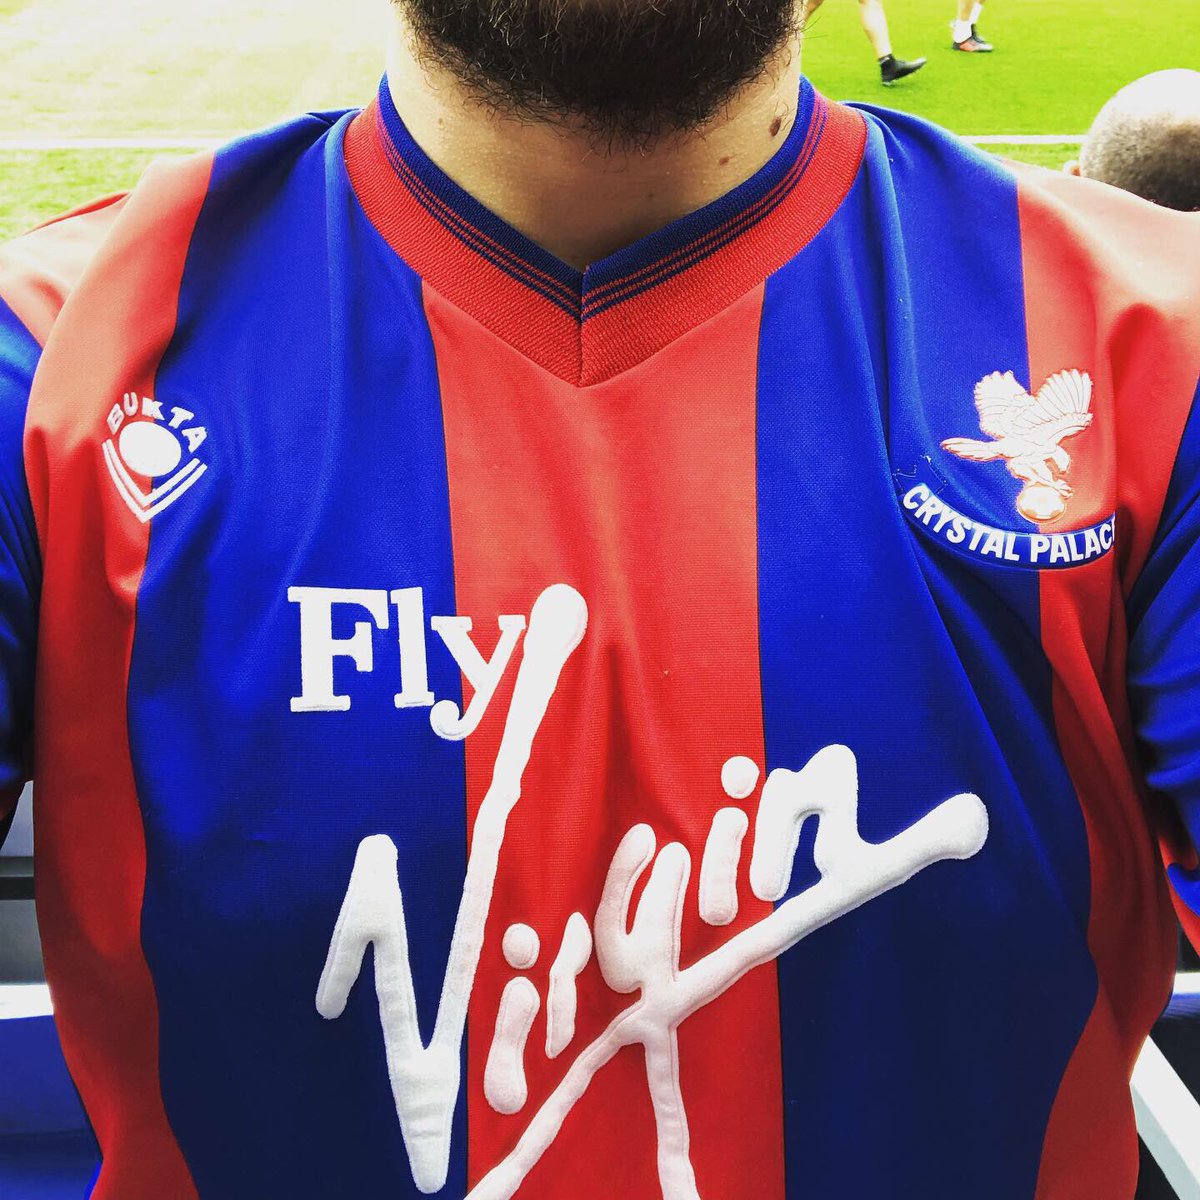  @CPFCHome Kit, 1988-90BuktaProbably my luckiest strike ever. Having bought a vintage  #CrystalPalace shirt from an online store, when I got it last week I realised I was sent instead an iconic, much rarer, way more valuable top by mistake! Awesome, if a but random 